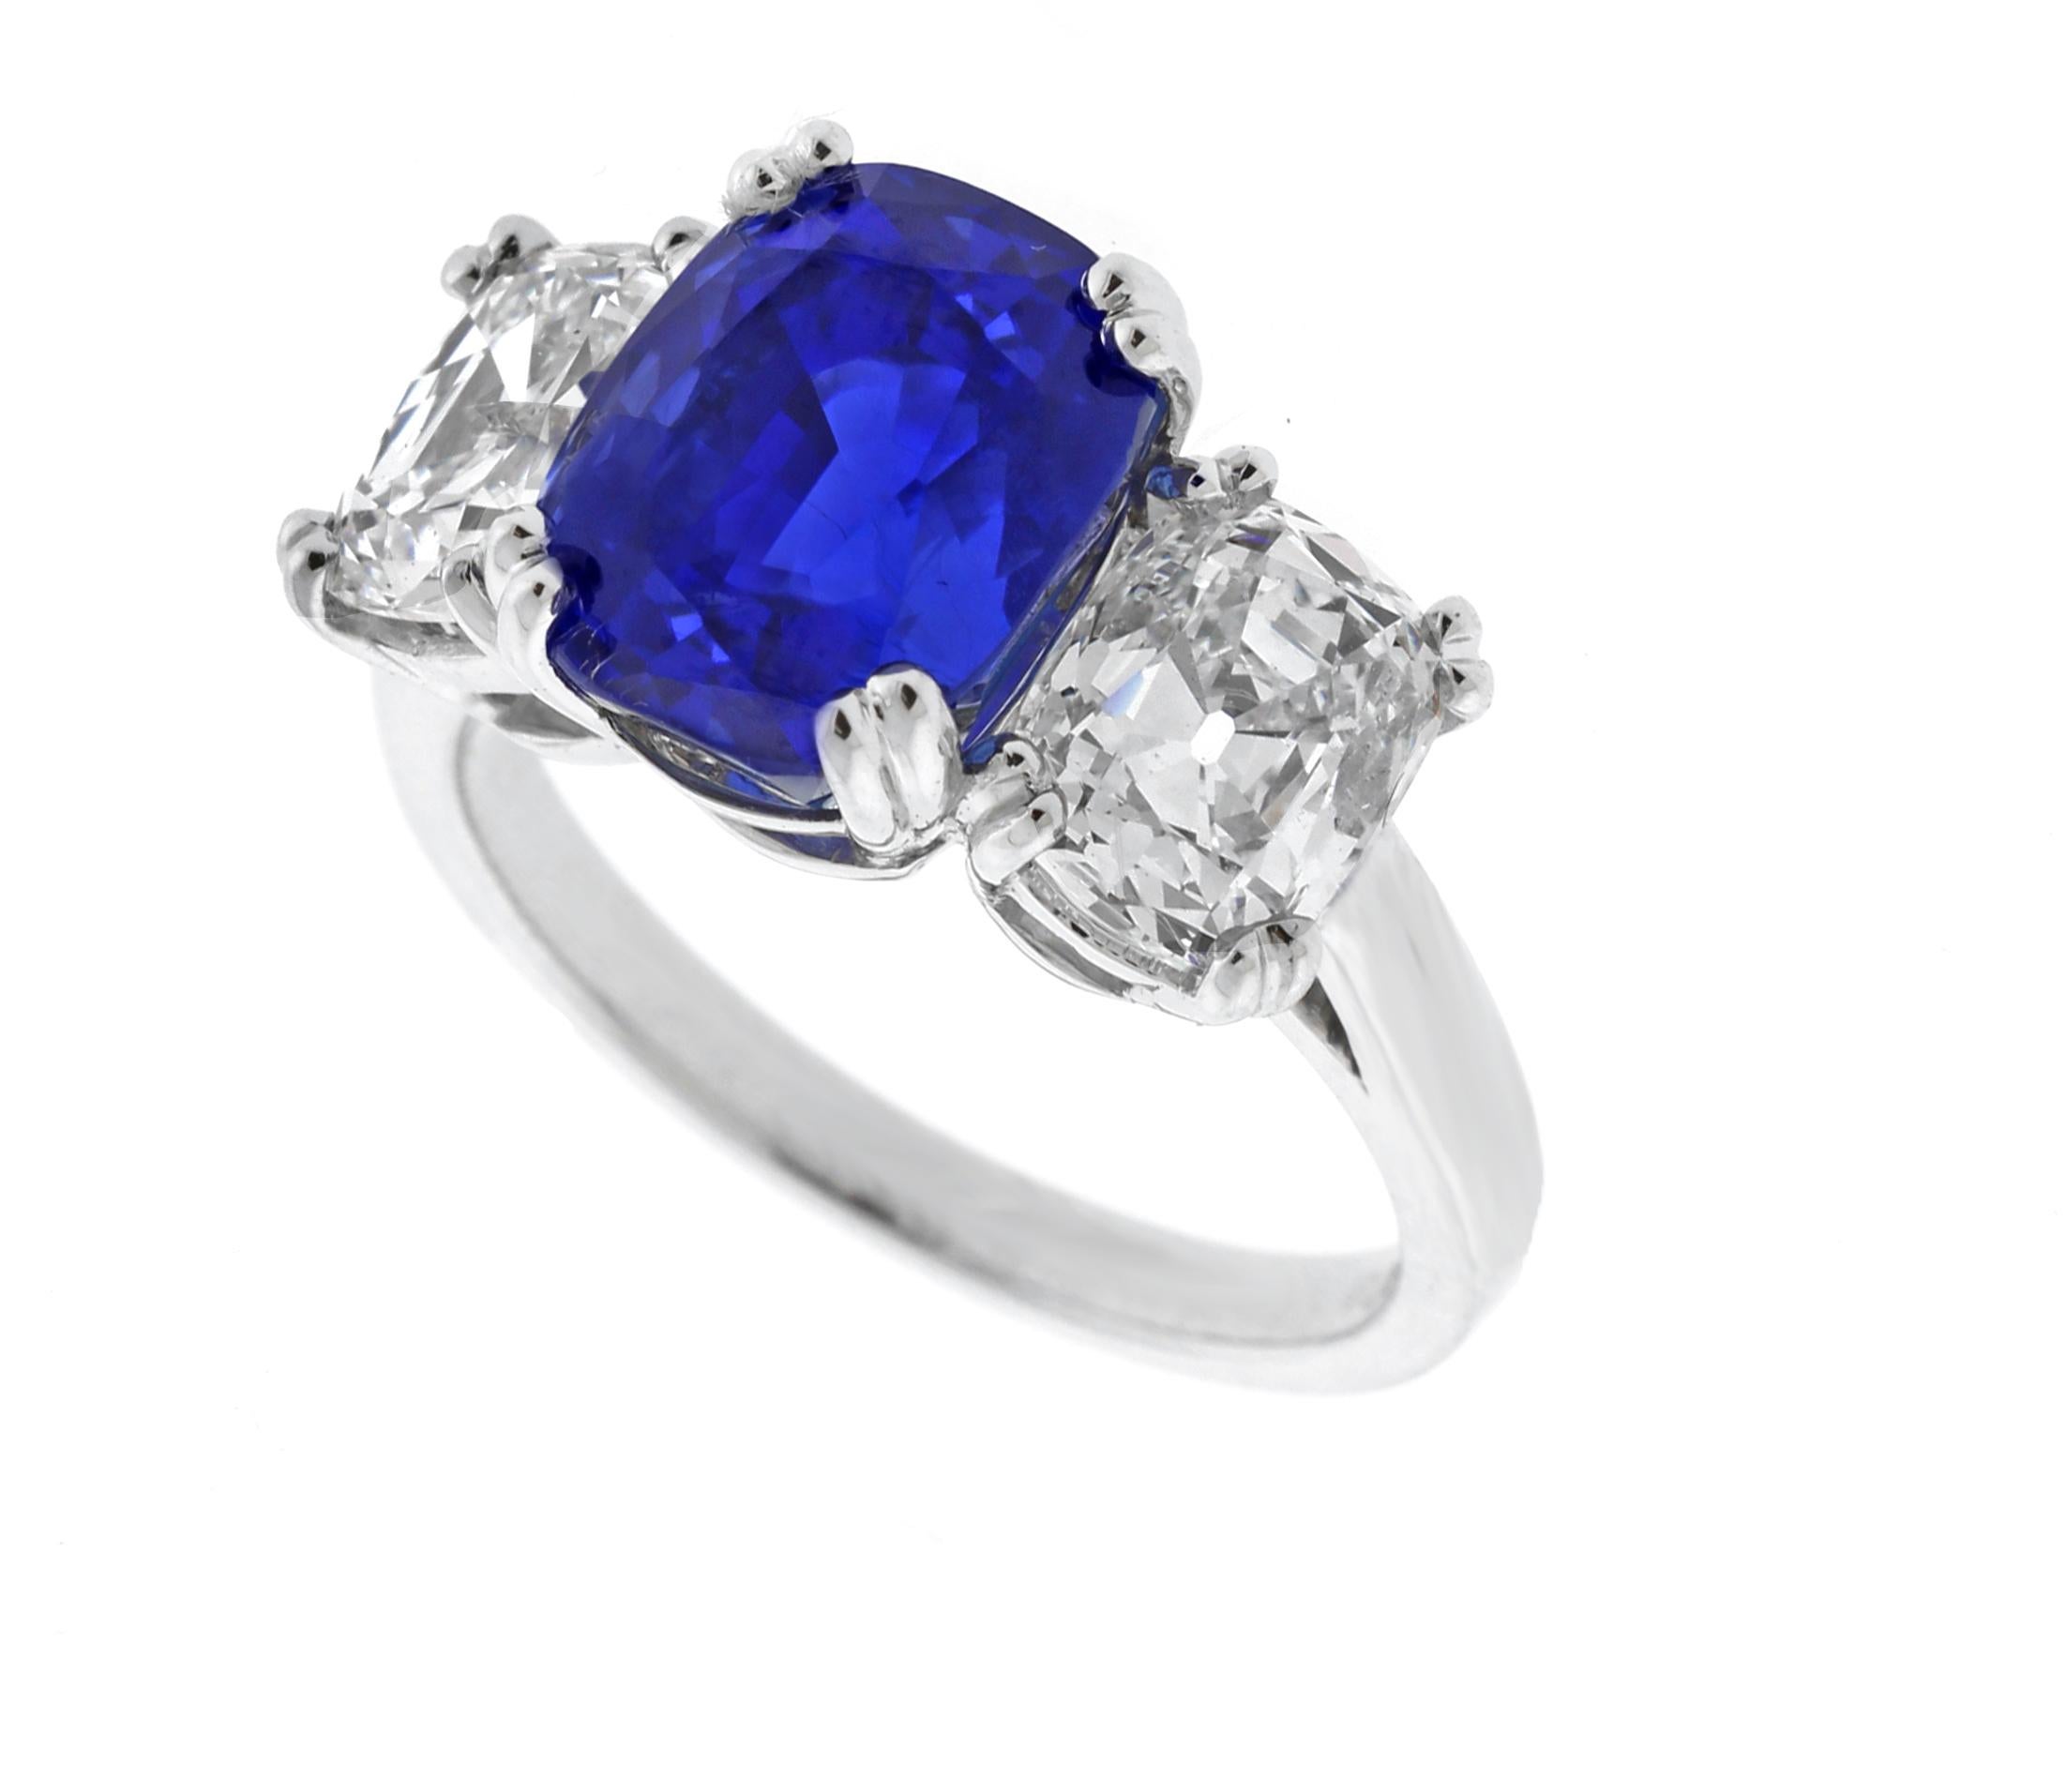 This exquisite piece represents a splendid marriage of craftsmanship, history, and the finest gemstones. It features an exceptional royal blue Burma Sapphire, weighing an impressive 5.72 carats, expertly cut into a cushion shape and certified by the